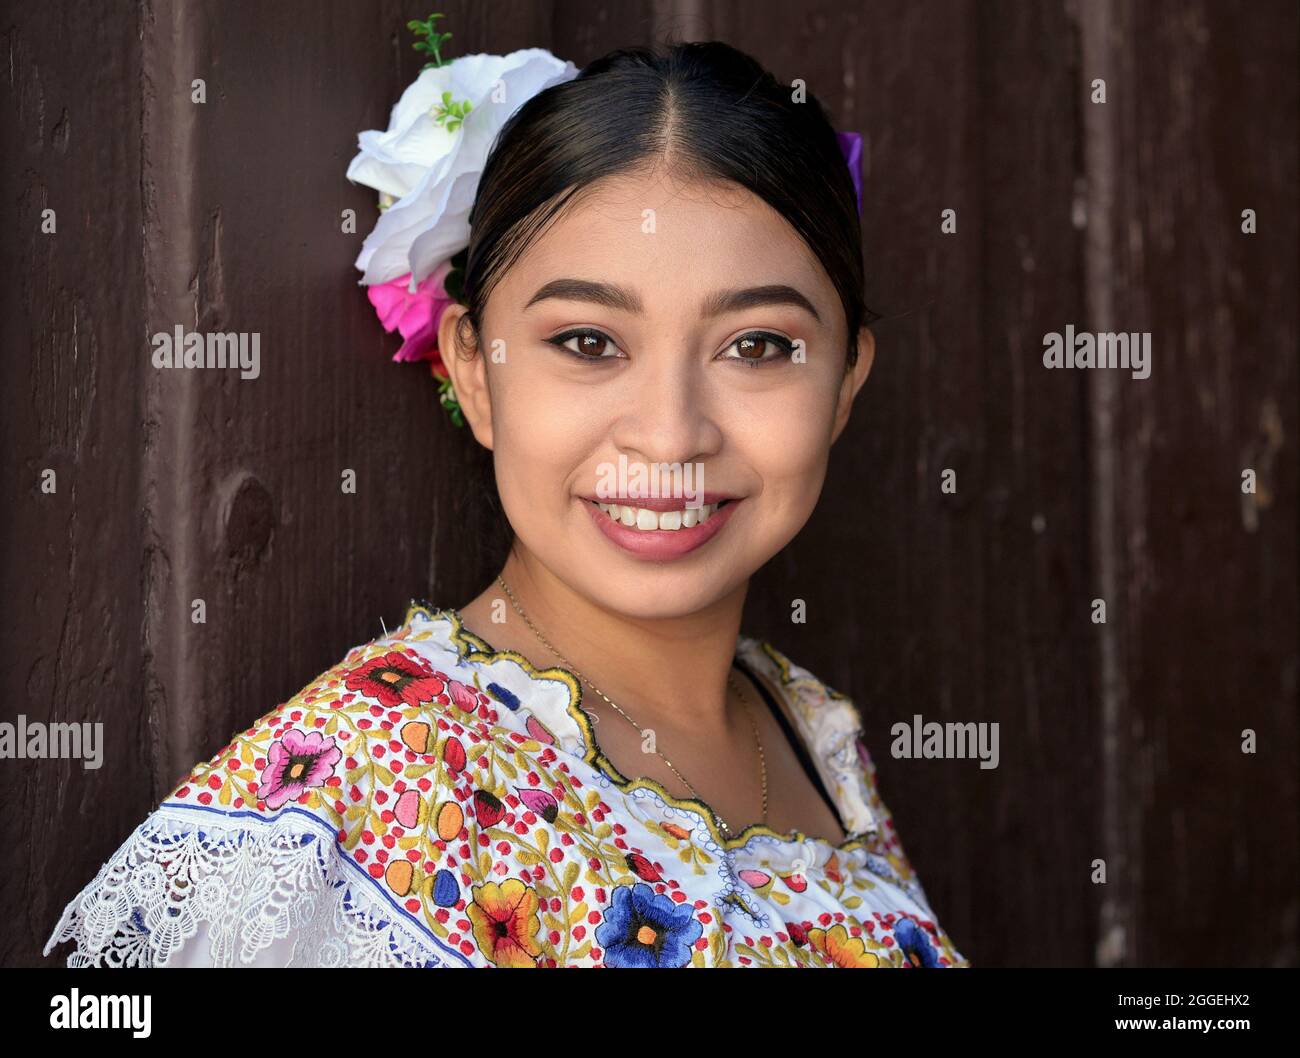 Young beautiful Mexican woman with makeup wears traditional Mayan Yucatecan folkloric dress with flowers in her hair and smiles for the viewer. Stock Photo